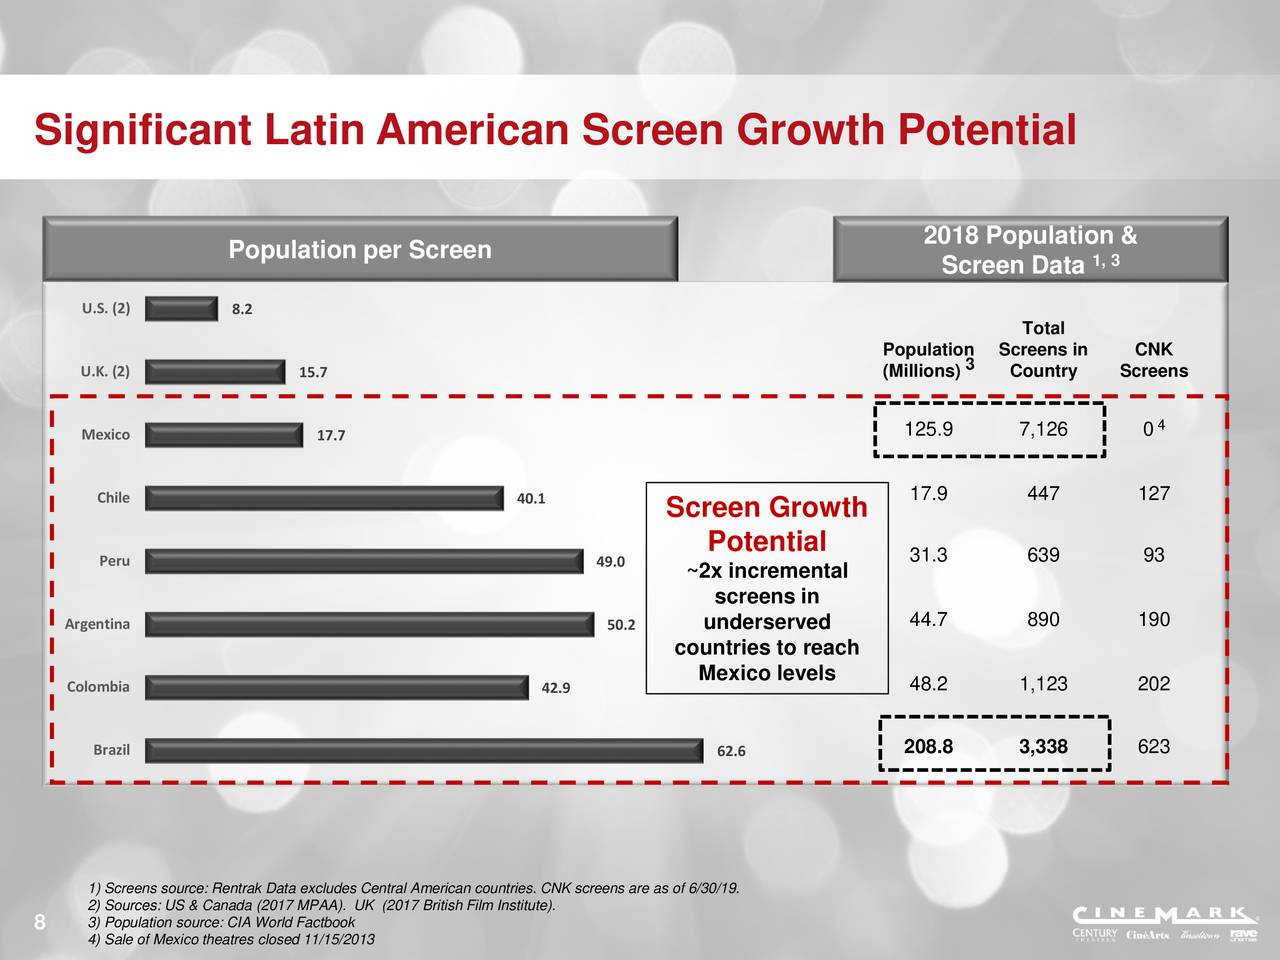 Significant Latin American Screen Growth Potential